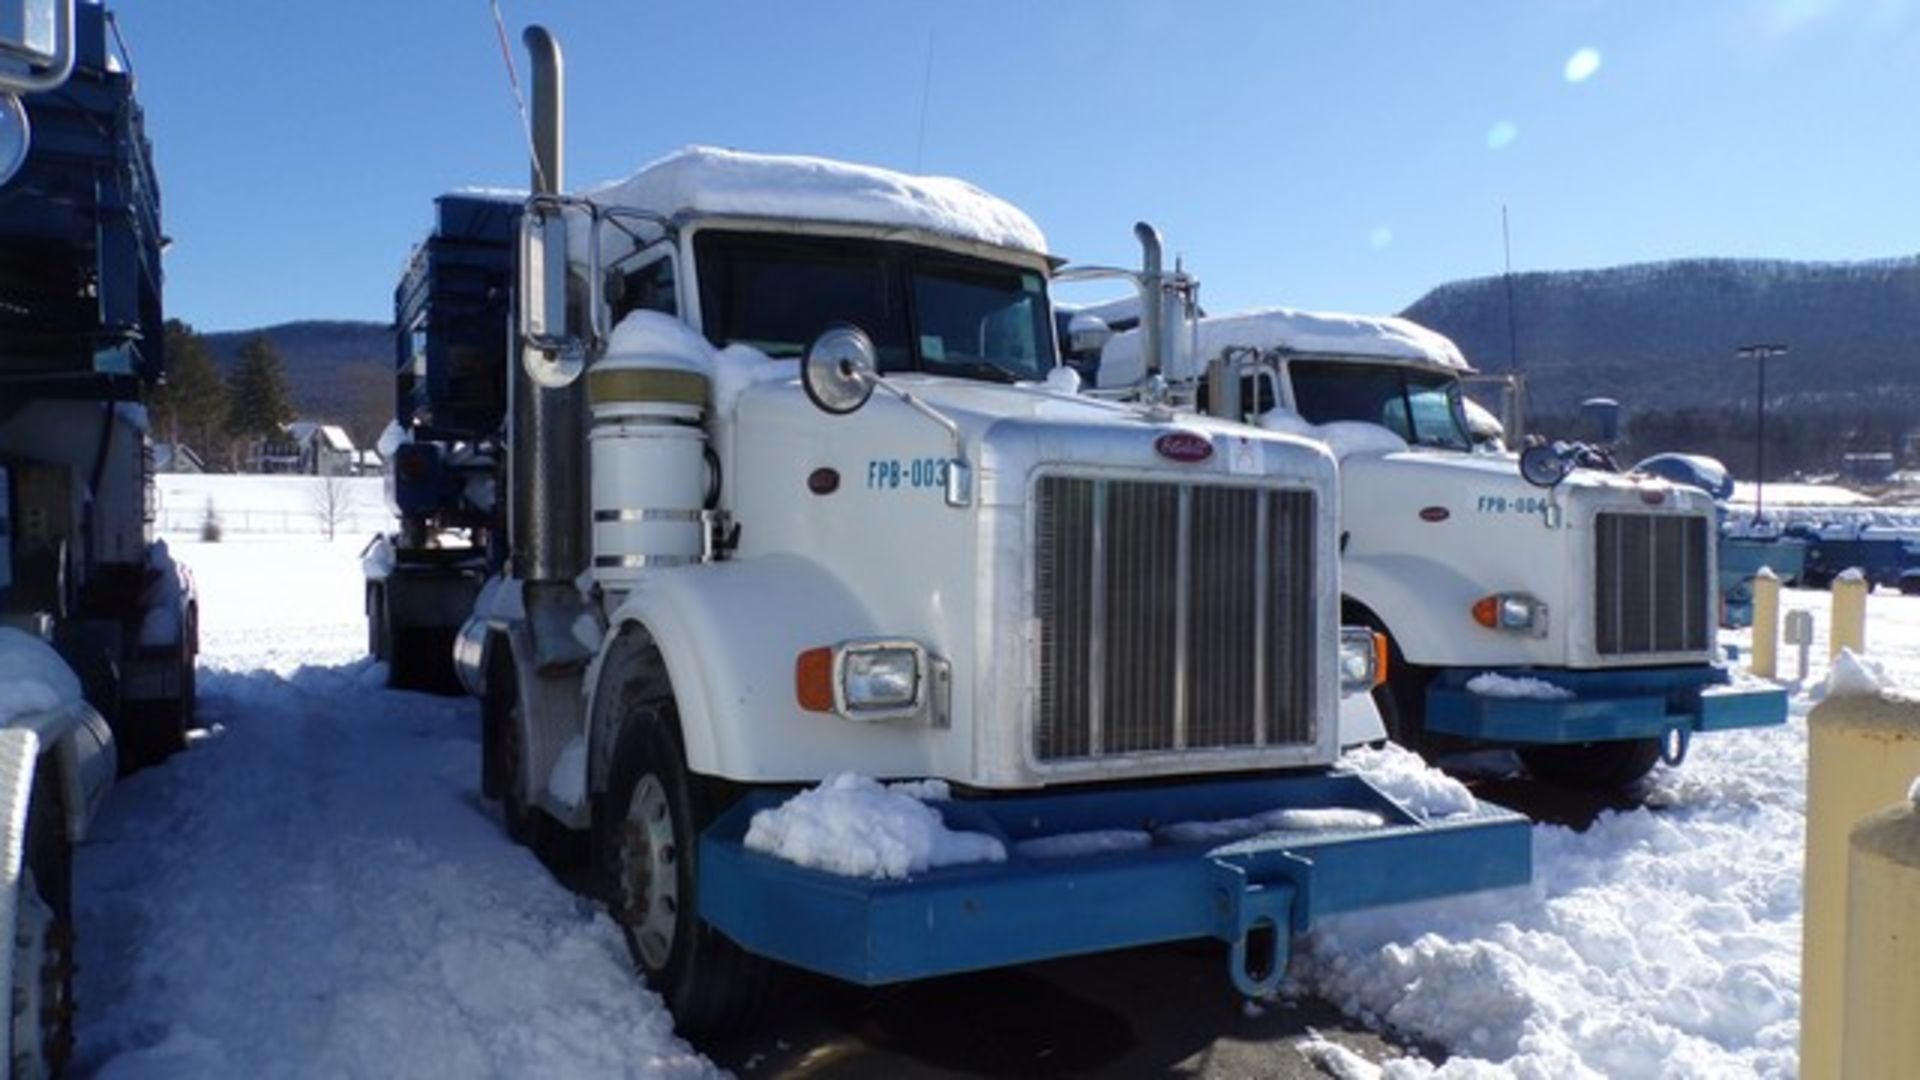 Located in YARD 5 - Mill Hall, PA - (P-7) (FPB-003) (X) 2006 PETERBILT 378TANDE - Image 13 of 15